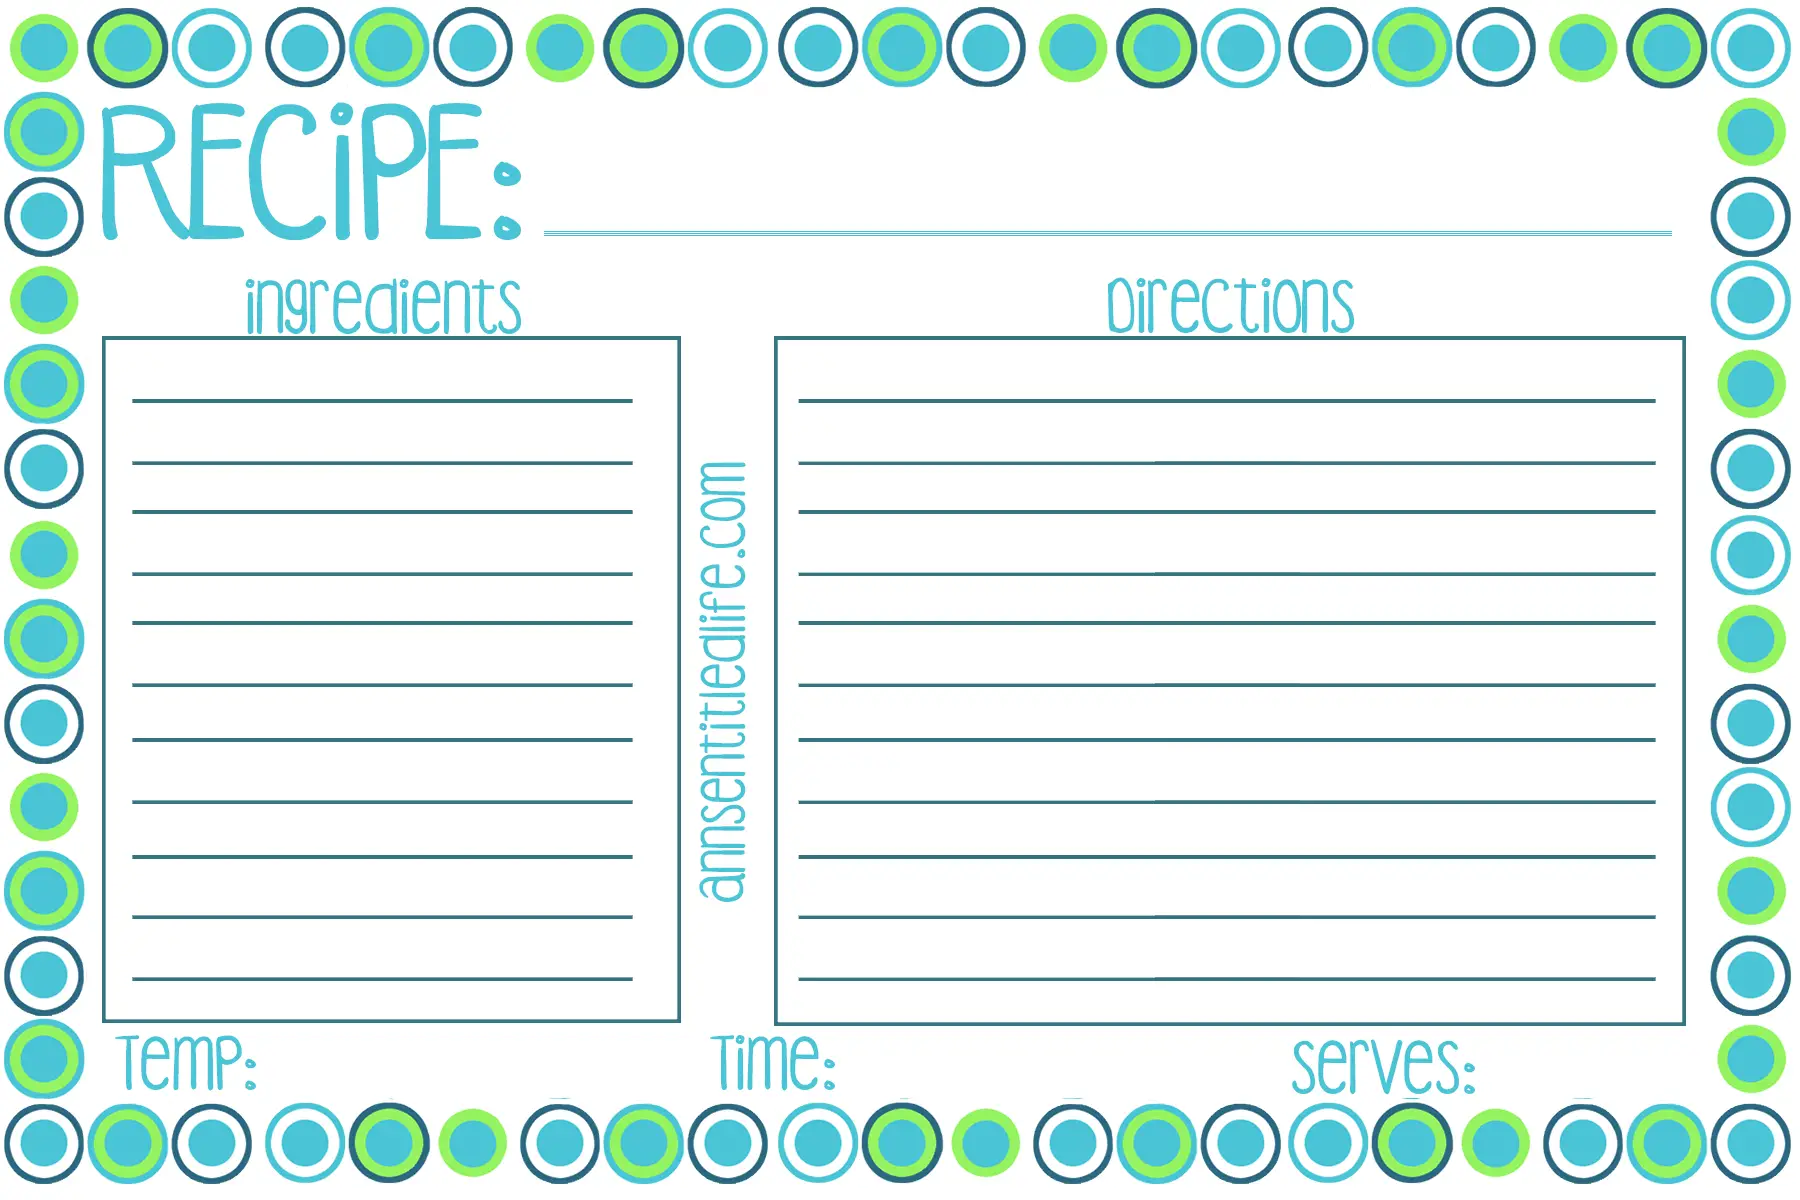 free recipe card templates to download